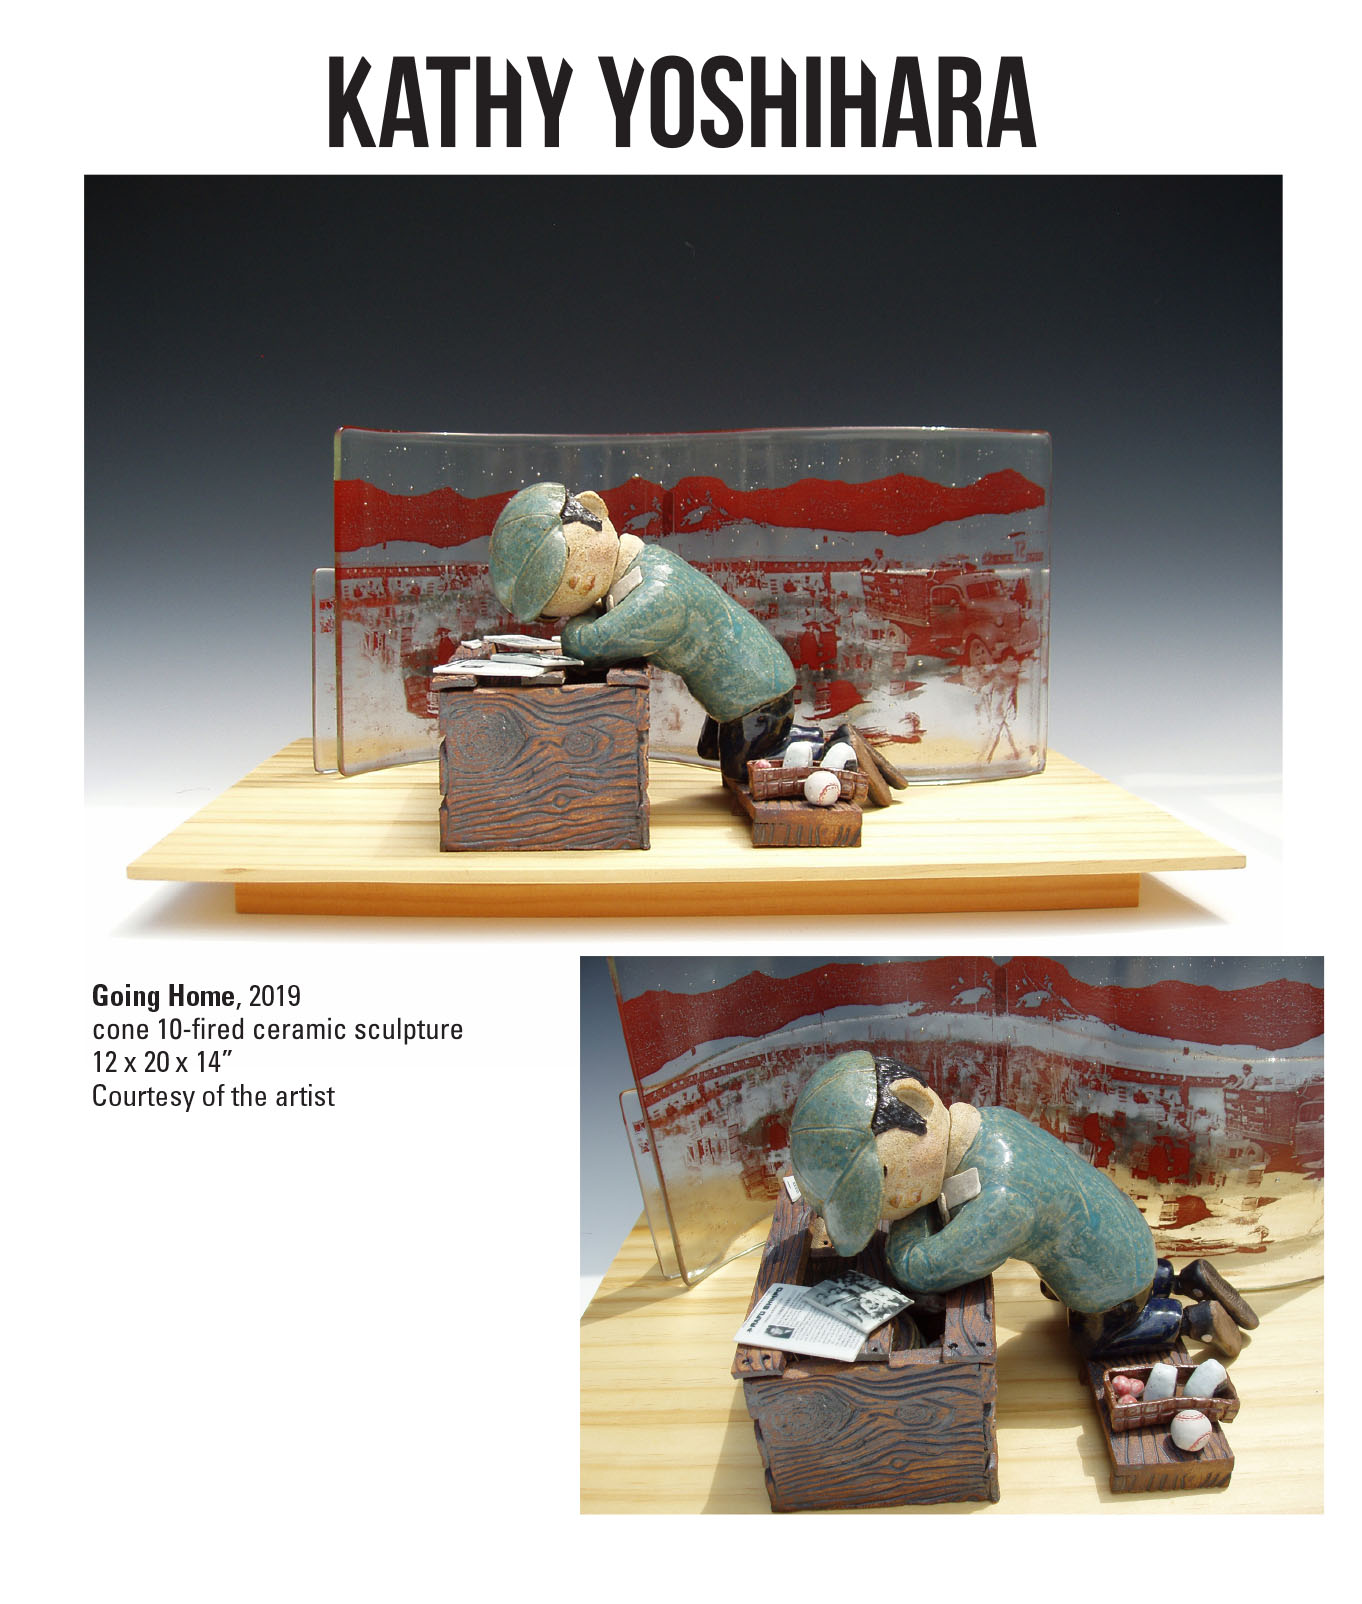 Kathy Yoshihara, Going Home, 2019. Cone 10-fired ceramic sculpture. 12 x 20 x 14” Courtesy of the artist. A sculpture of a man resting his head on a wooden crate.